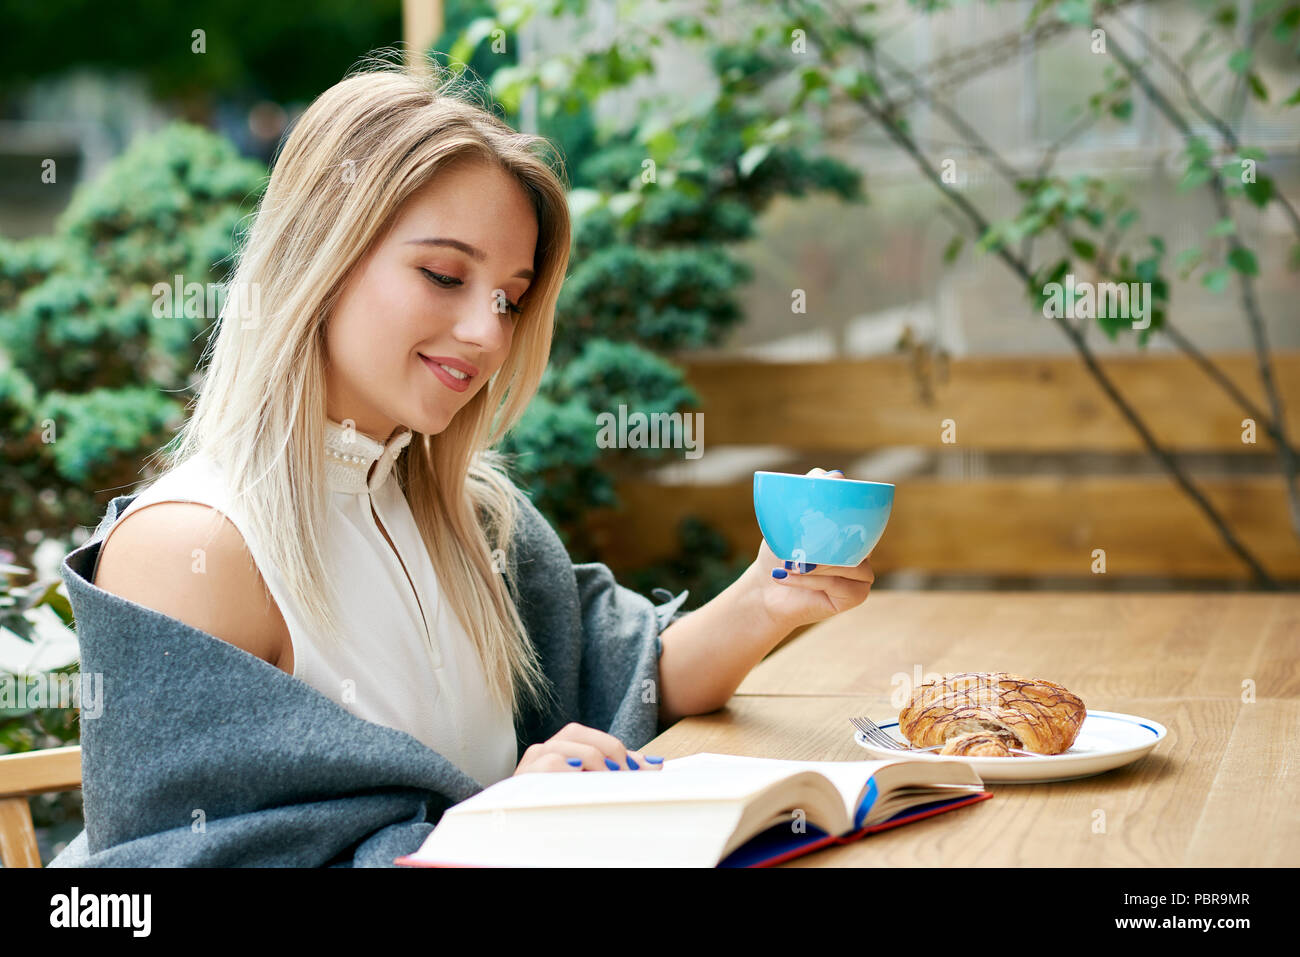 Blonde girl reading a book while drinking coffee on outdoors cafe's lounge. Wearing white blouse decorated with pearls, shoulders covered with grey warm blanket. Smiling, having good time. Stock Photo